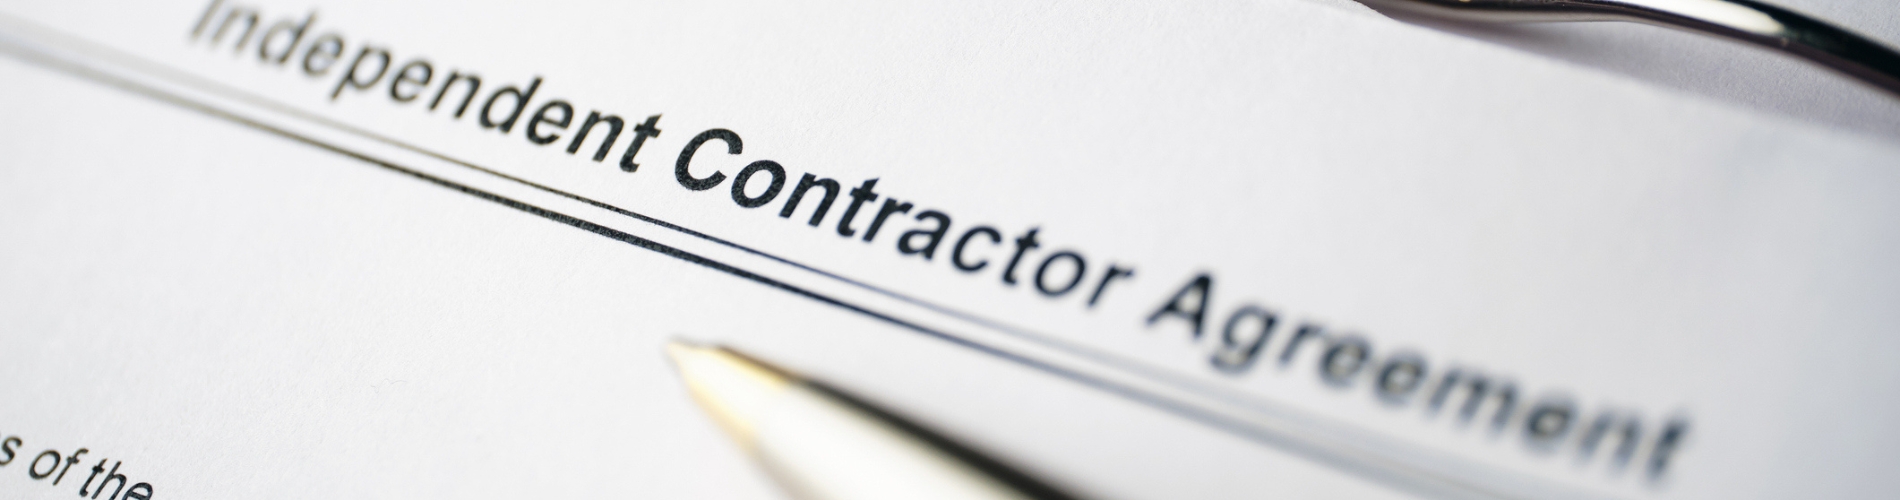 Independent Contractor Image